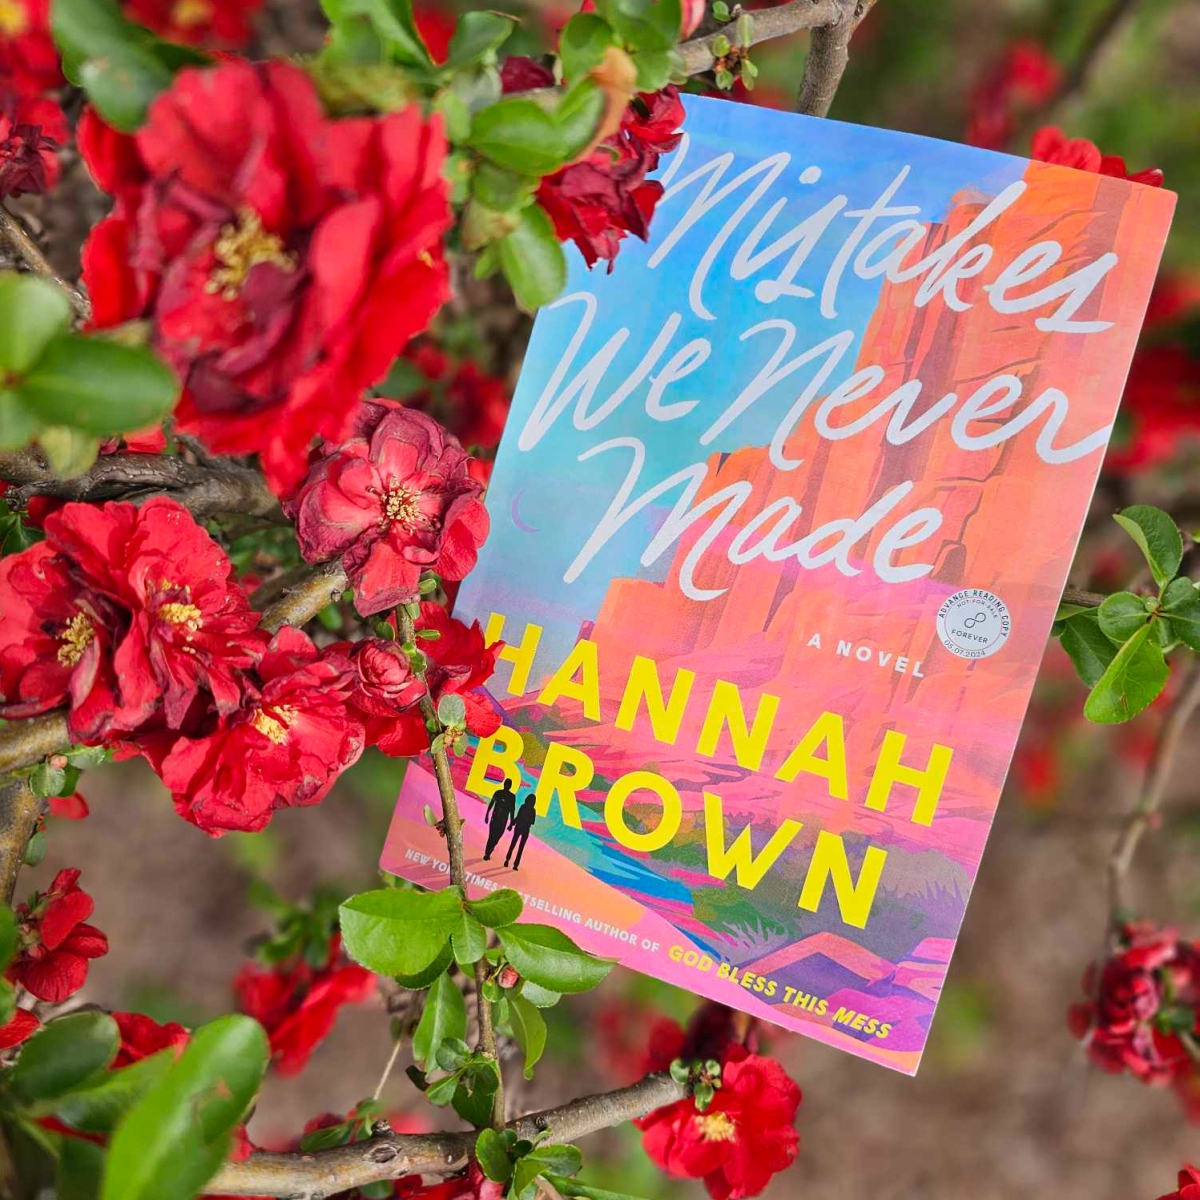 Book Review: “Mistakes We Never Made” by Hannah Brown